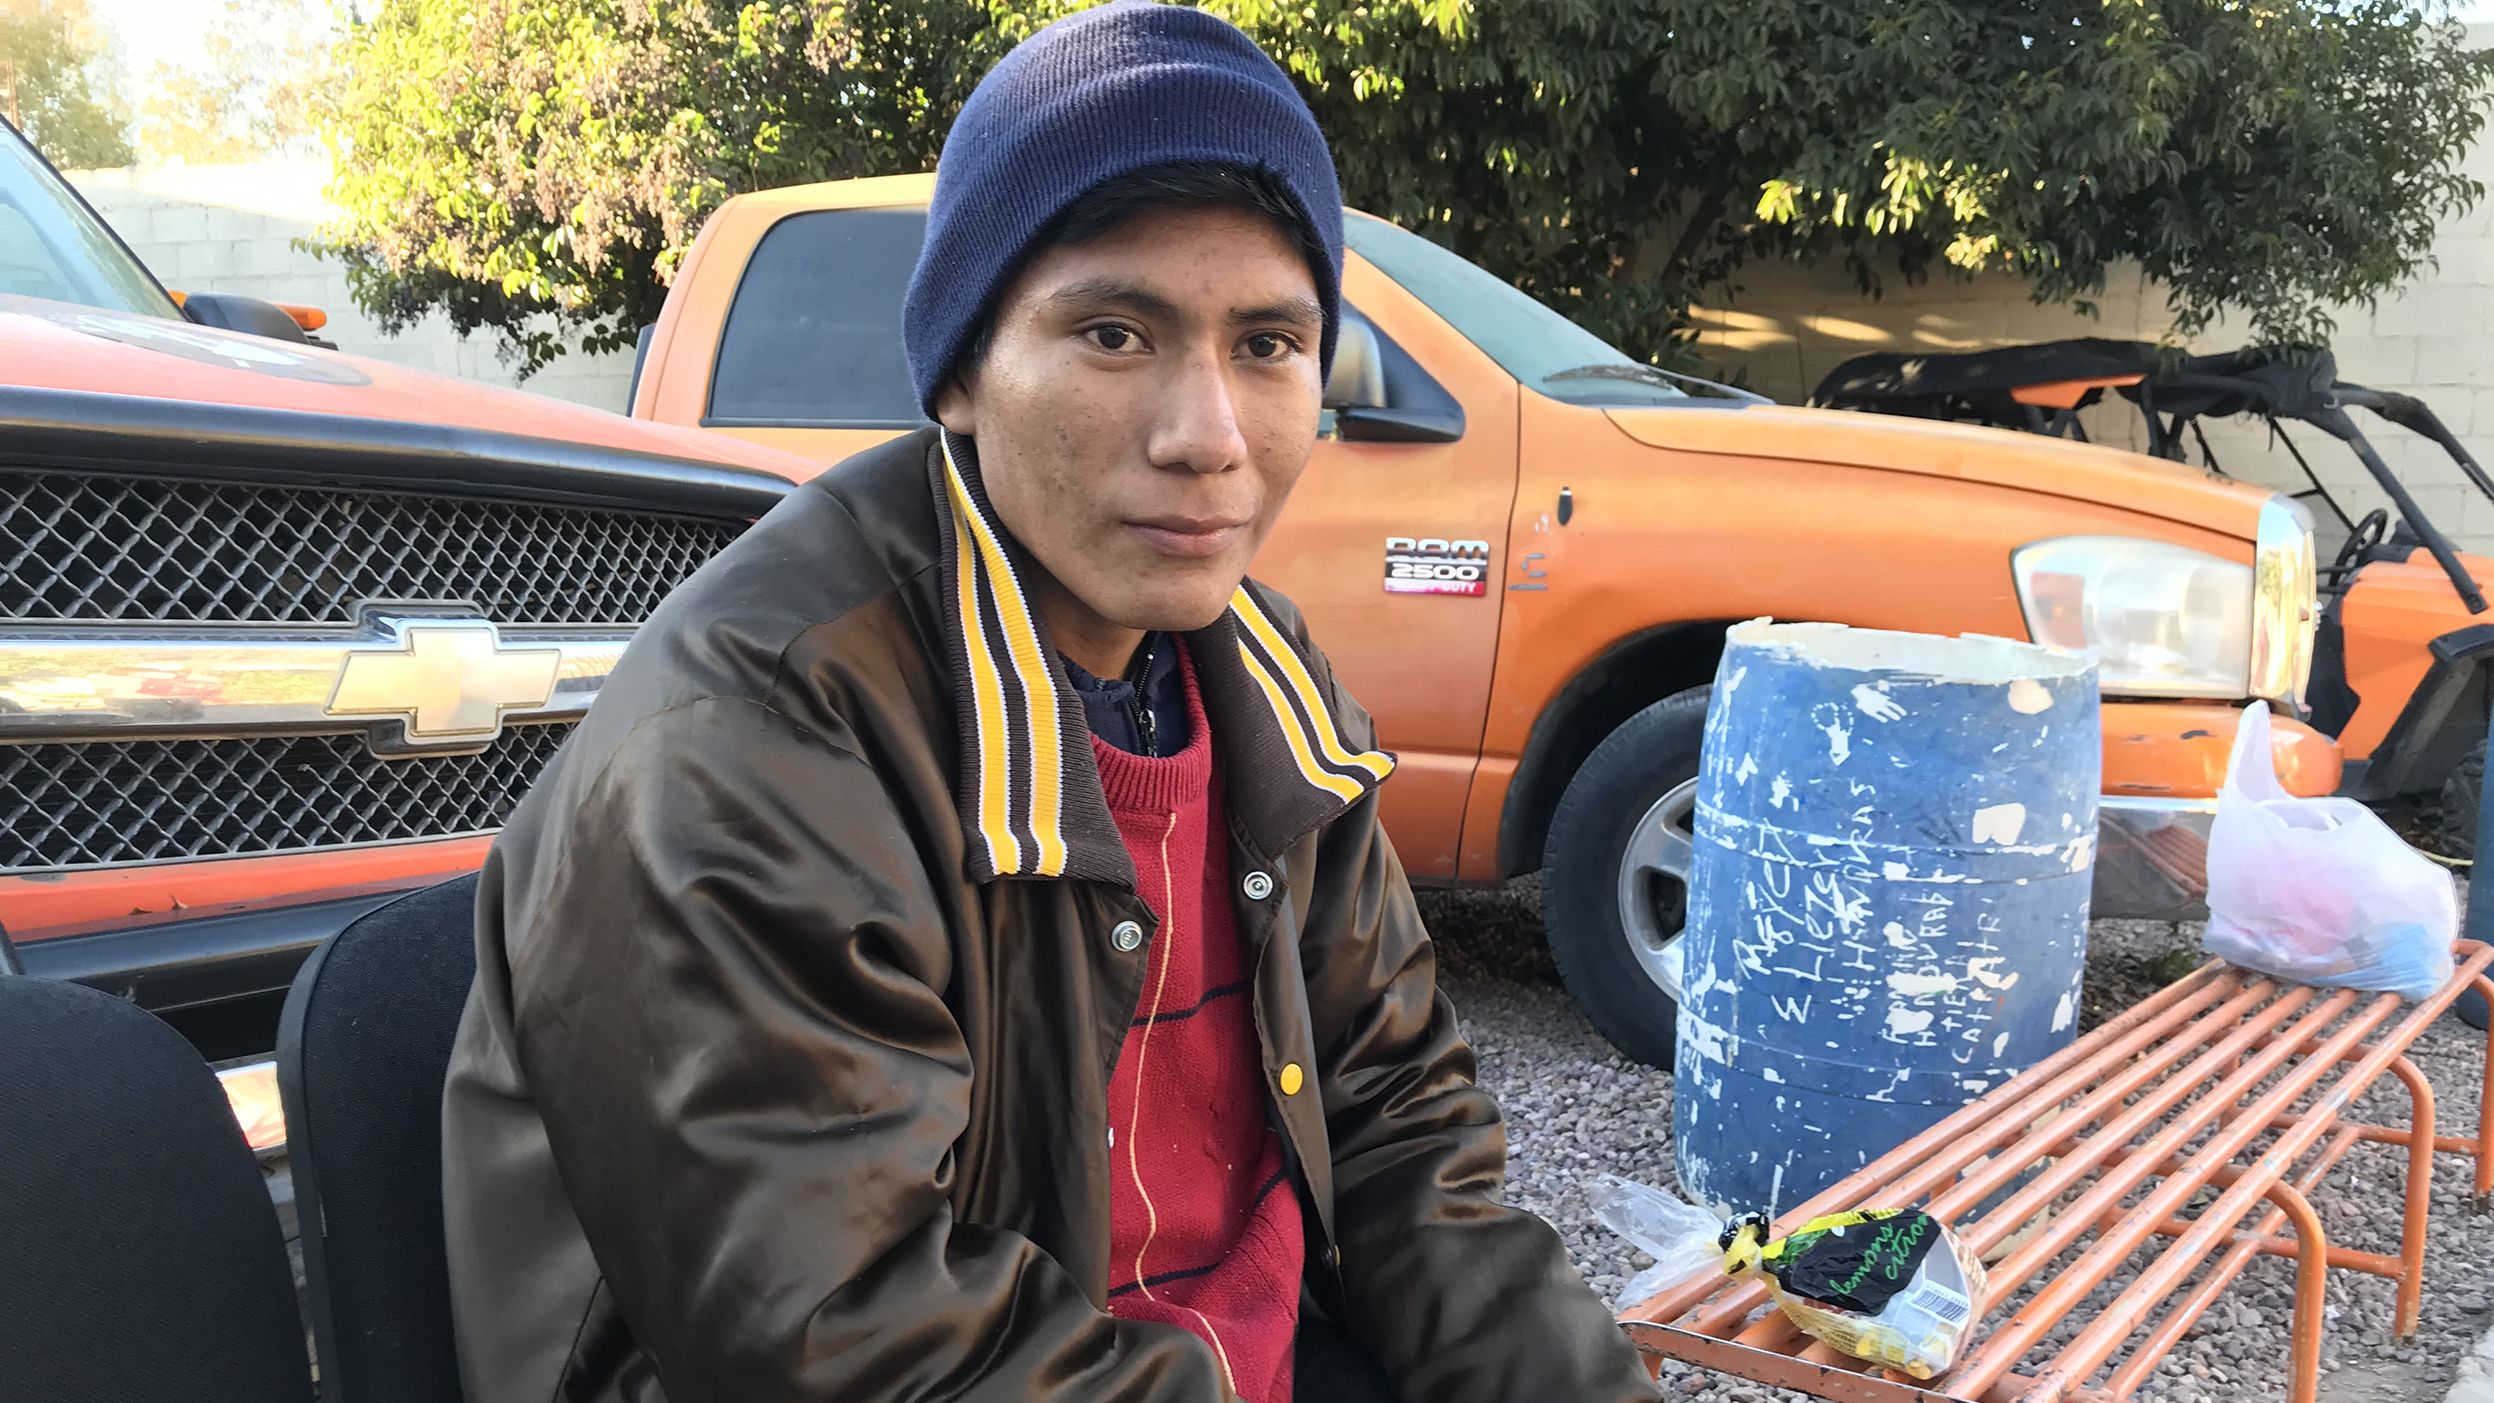 Kevin Ajtun, 16, waited for a ride to a migrant shelter in Nogales, Mexico on December 13.